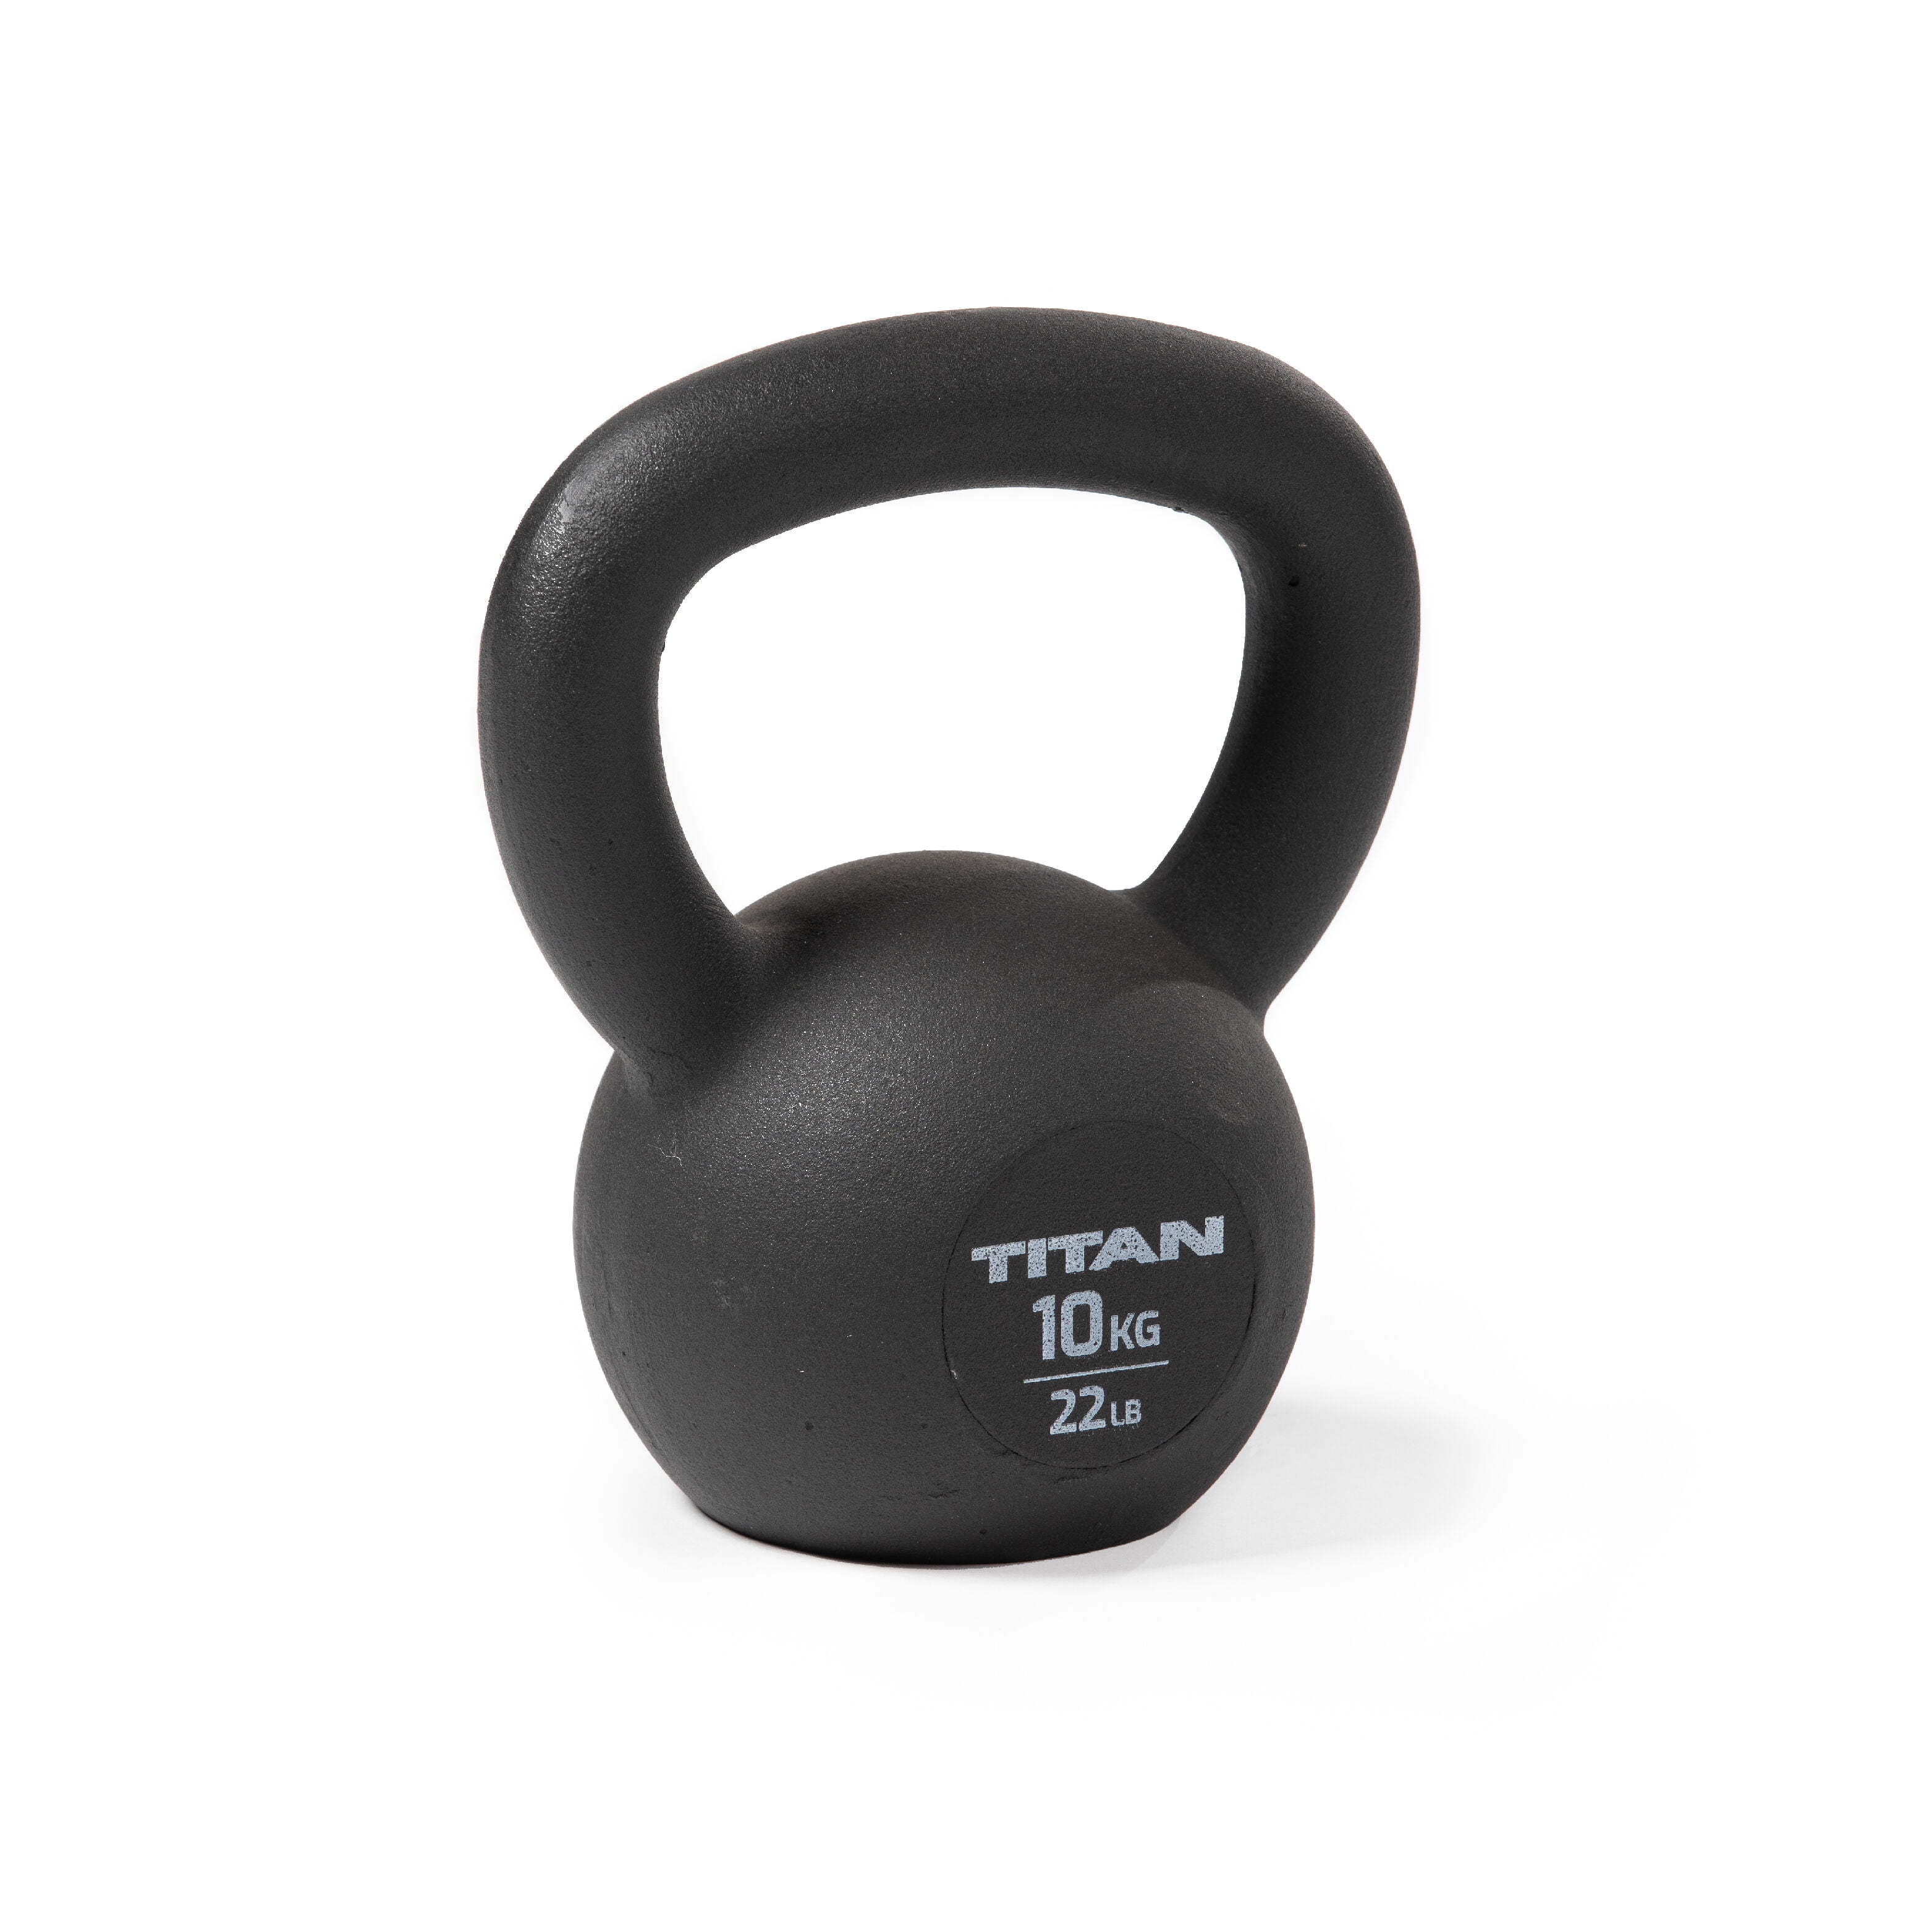 Titan Fitness 10 KG Cast Iron Kettlebell, Single Piece Casting, KG and LB  Markings, Full Body Workout